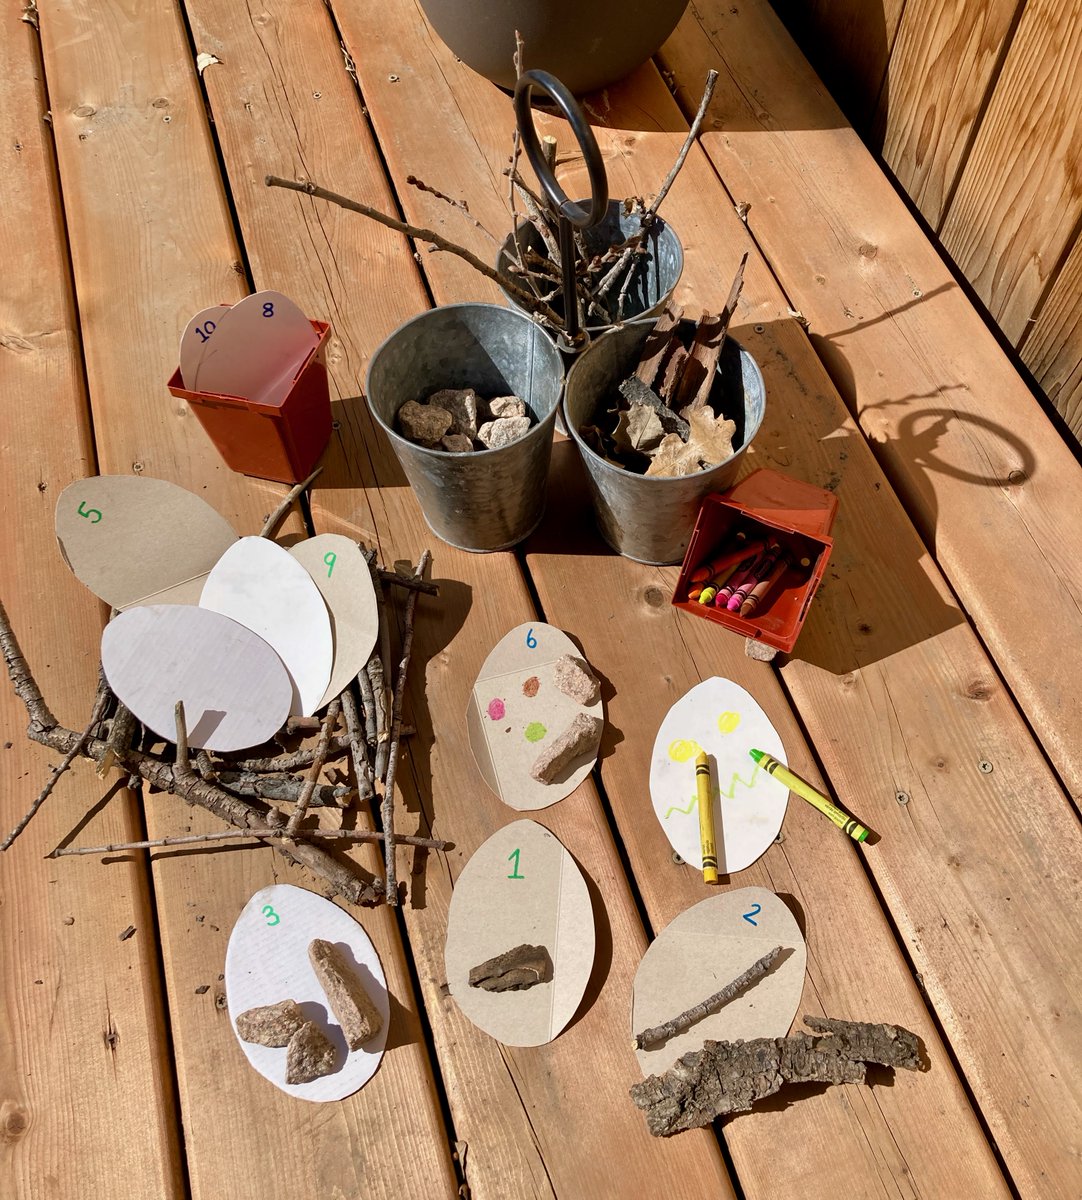 Egg-shaped cards, sticks and stones are all you need to get kids exploring the #naturalenvironment,
engaged in #handsonlearning and developing their #maths skills.
helpingmychildgrow.com
bit.ly/35ZHNig
#sensoryplay #creativity #earlyyears #cognitiveskill #KS1maths #egg